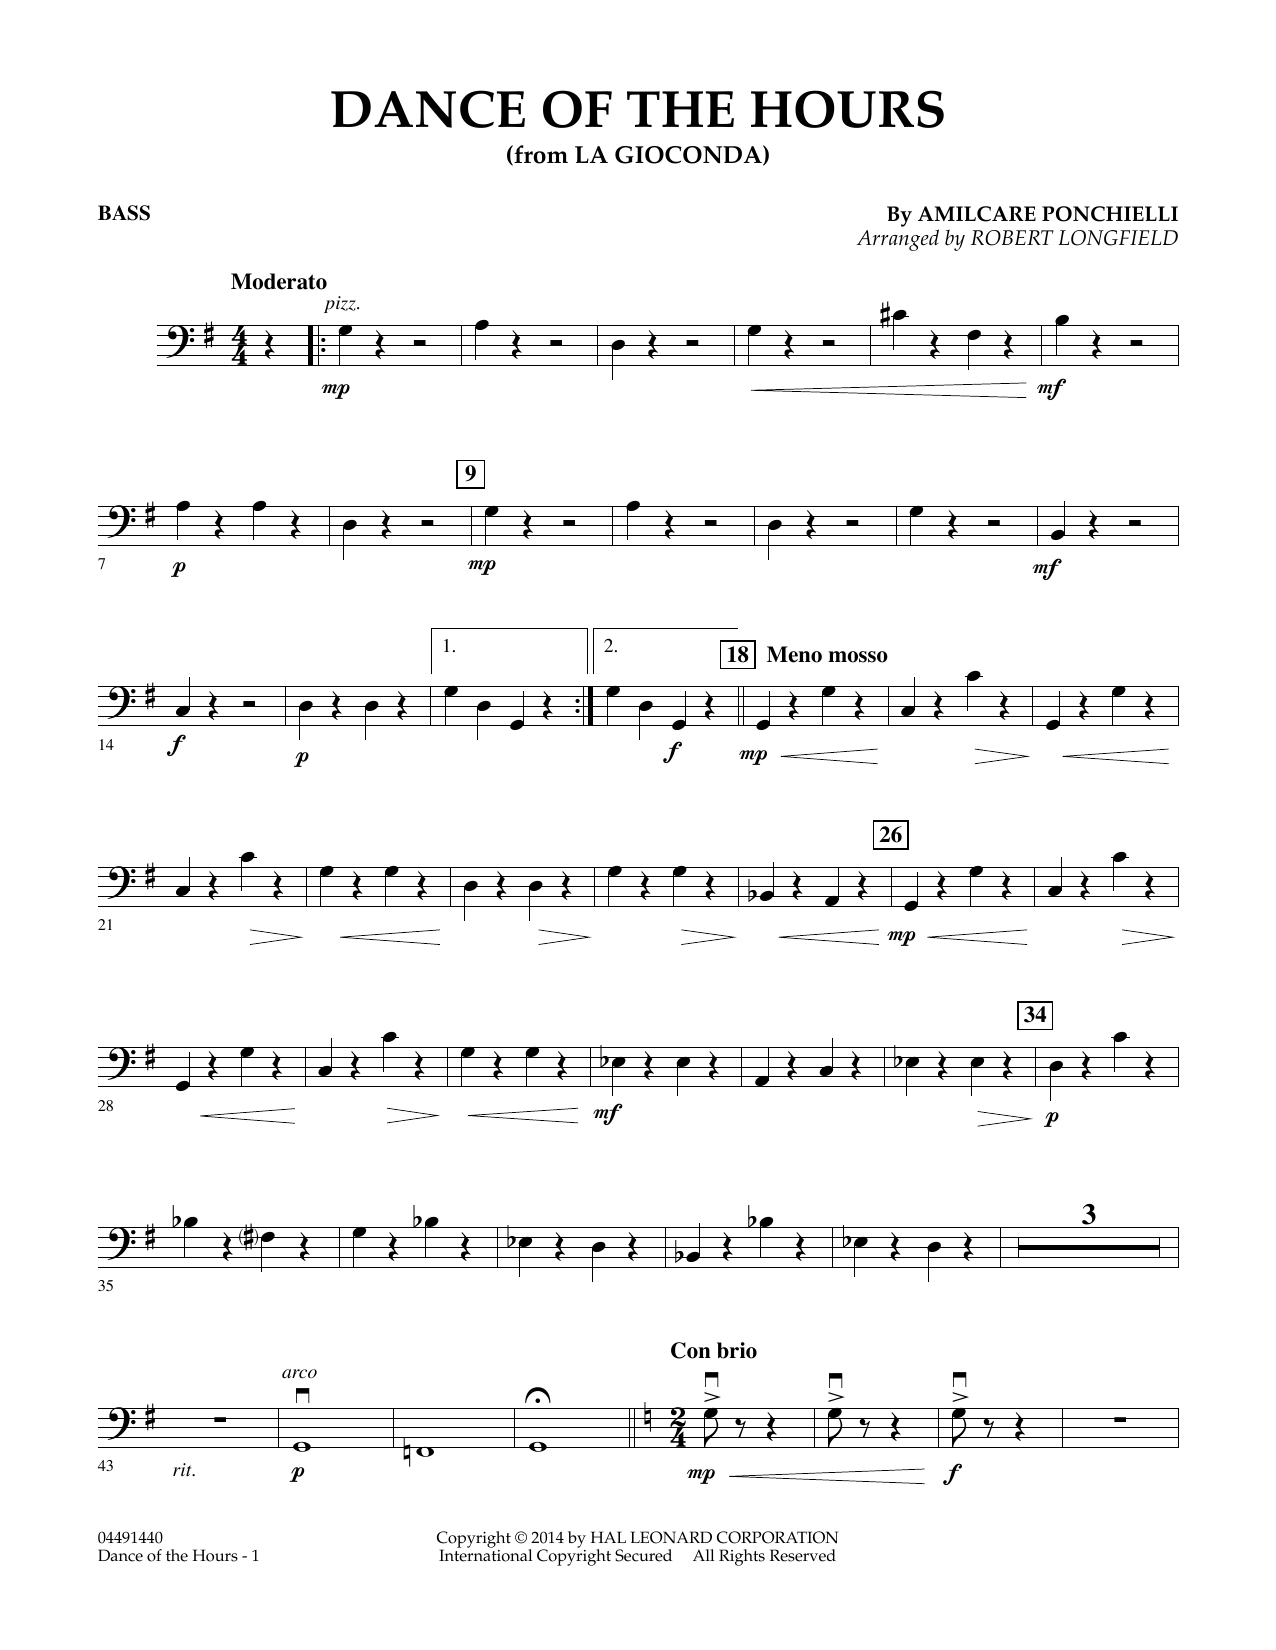 Download Amilcare Ponchielli Dance of the Hours (arr. Robert Longfield) - Bass sheet music and printable PDF score & Classical music notes